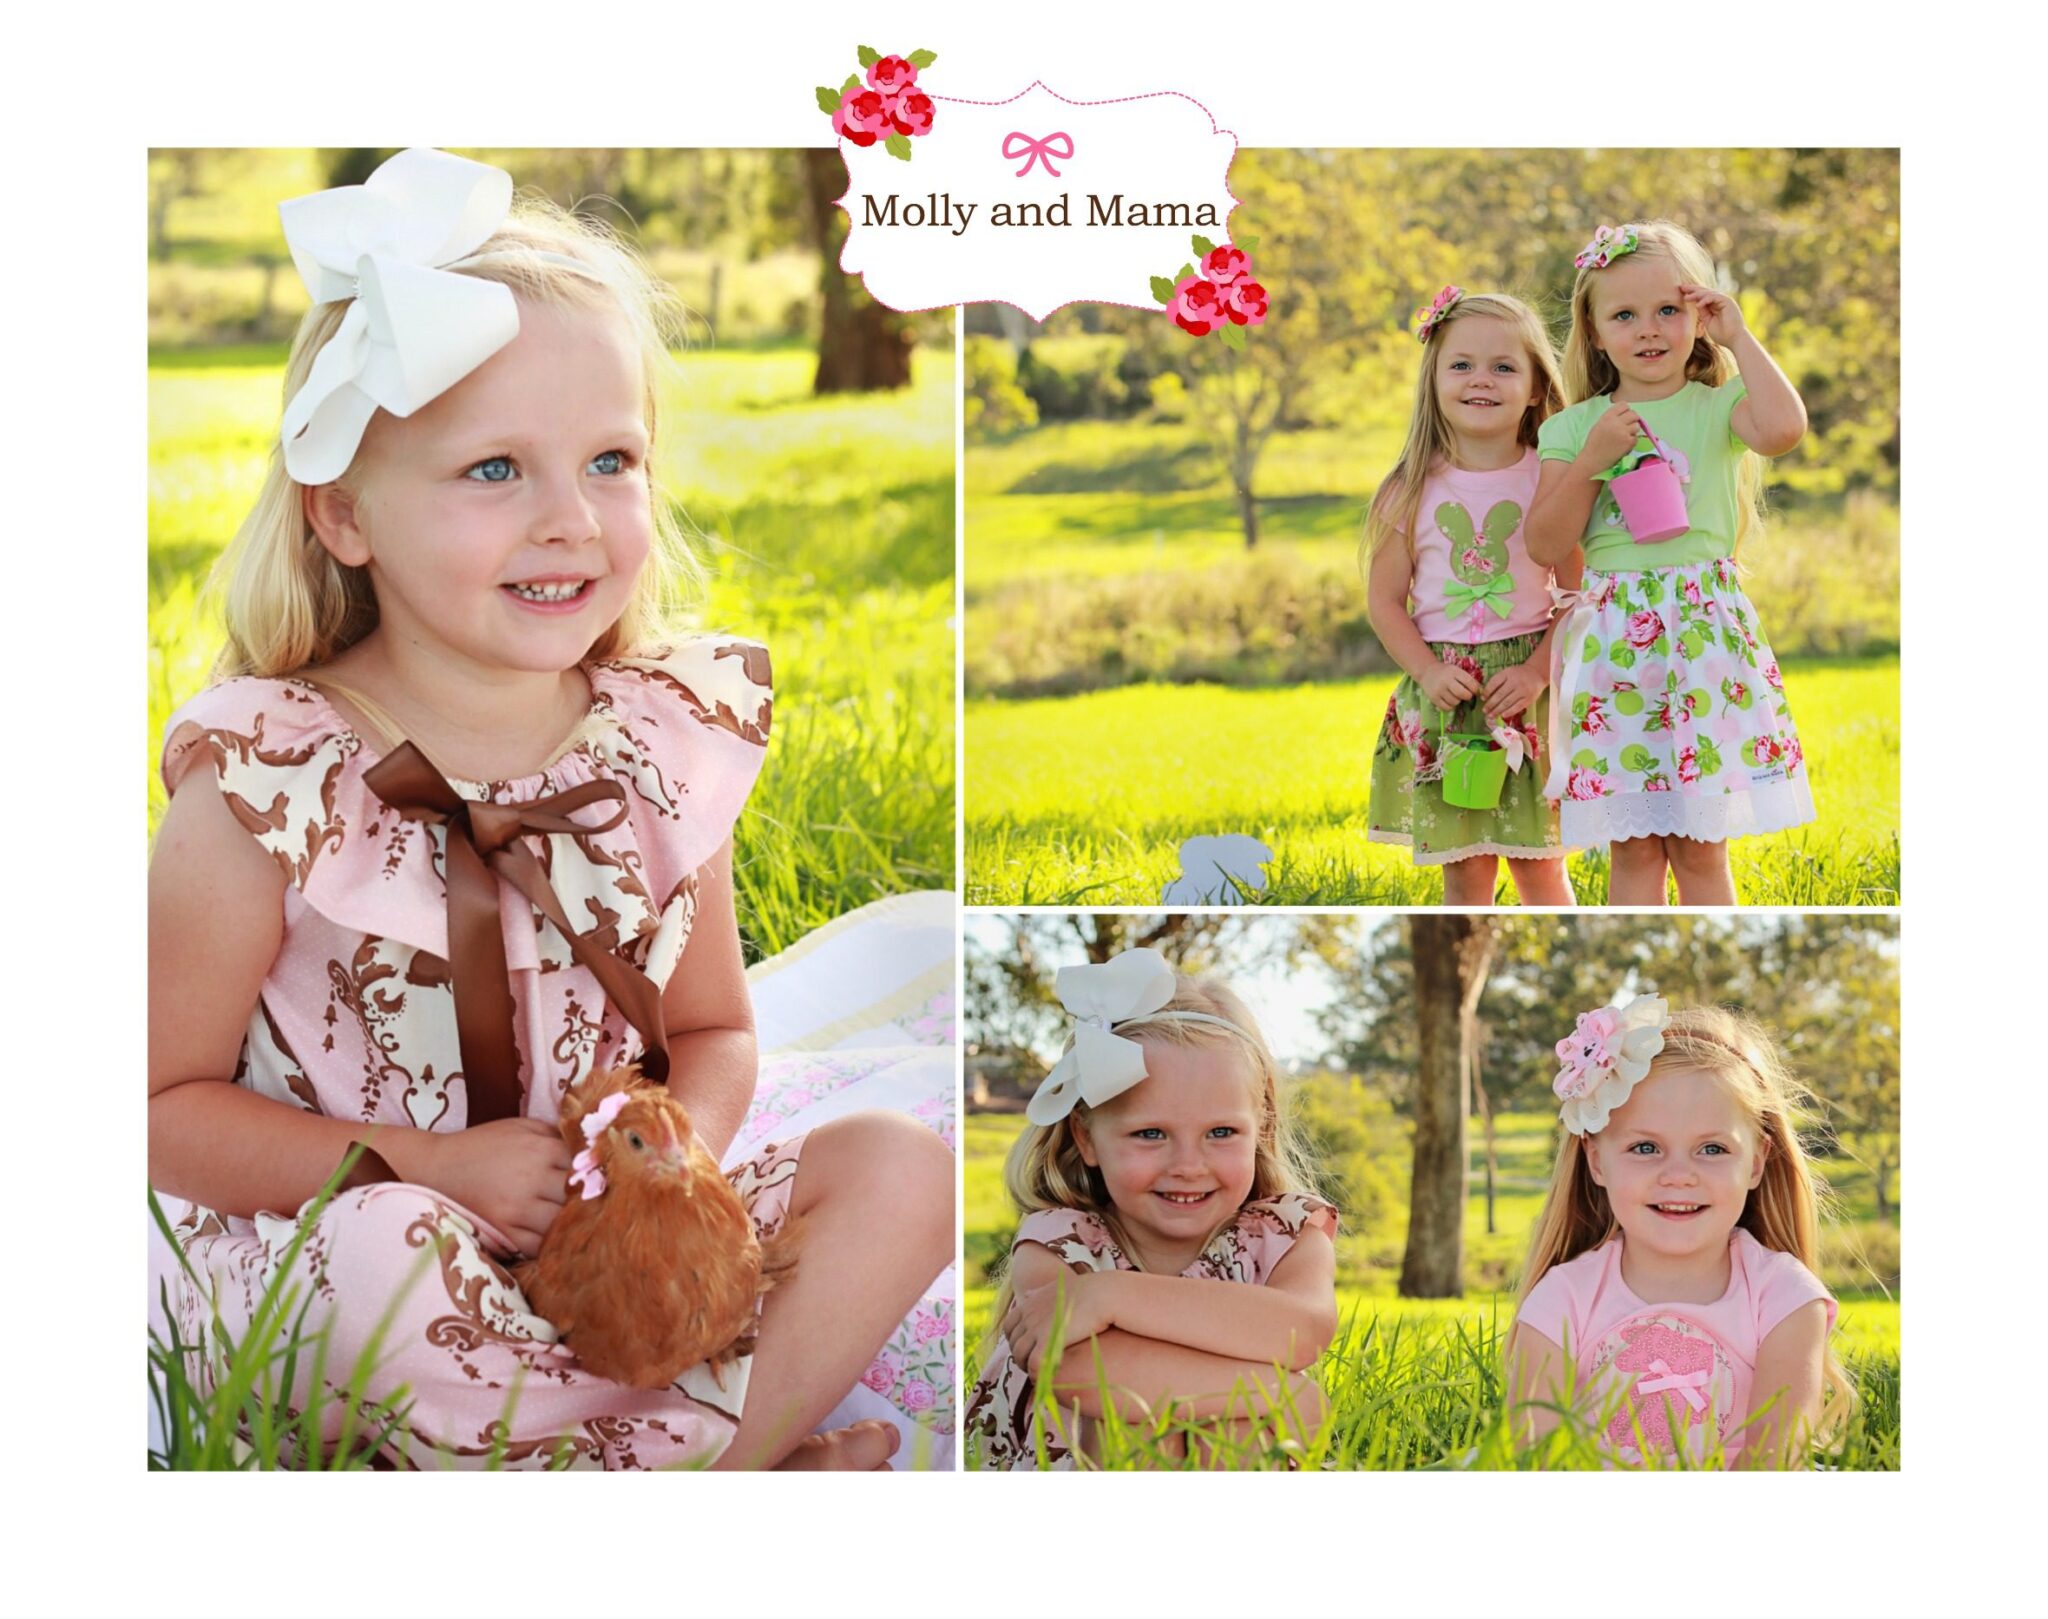 Easter Wishes – the Easter Collection Shoot